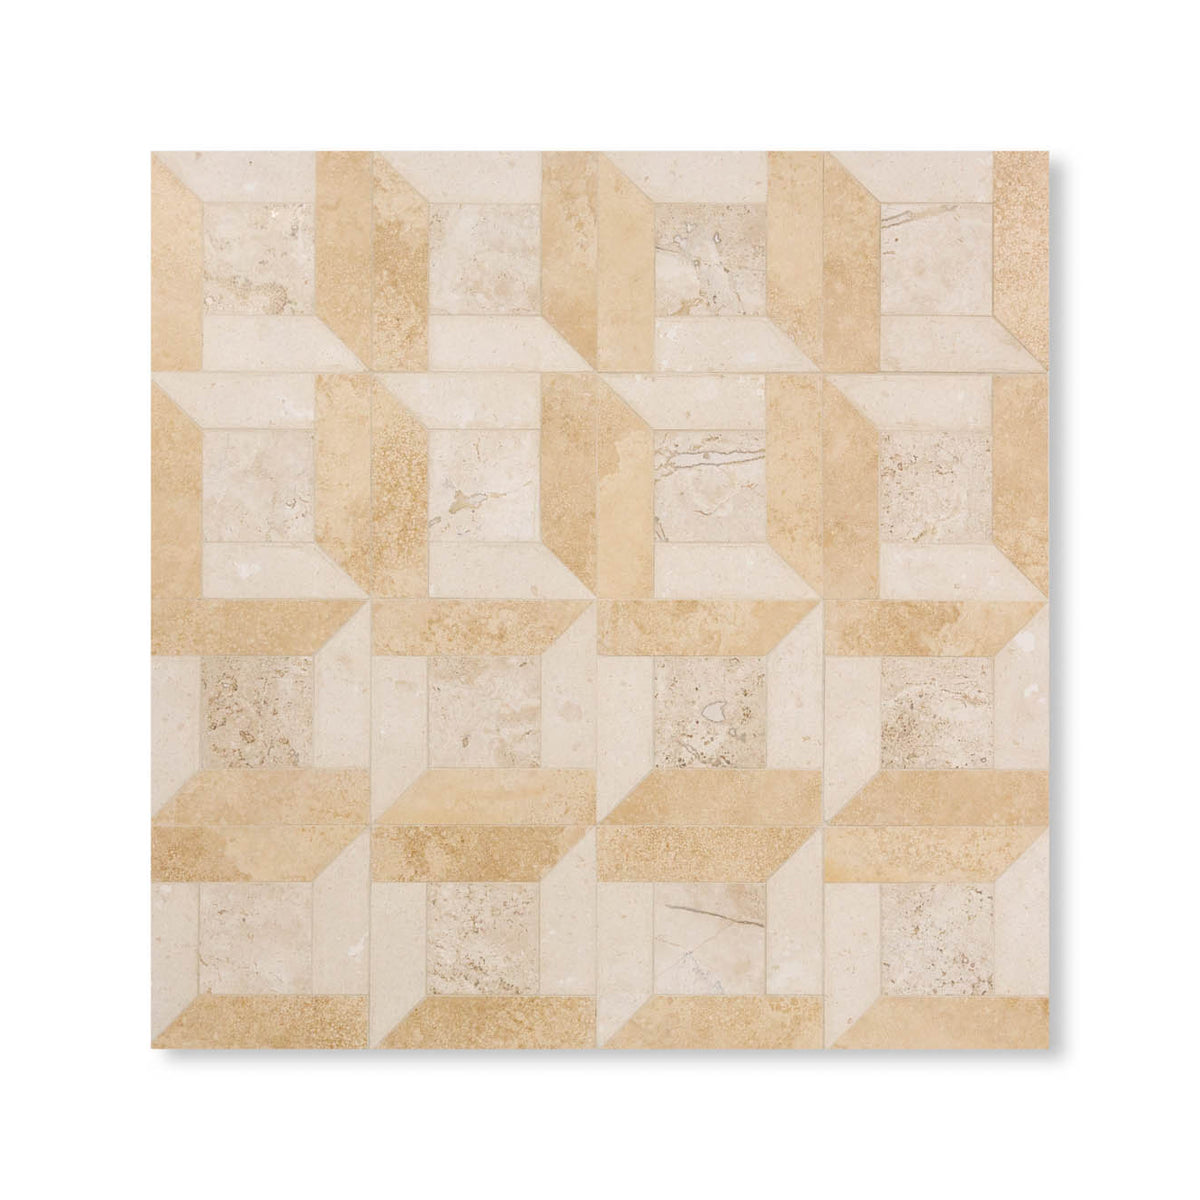 Shown in Seville Travertine with Dourdan and Pearl Marbles view 1